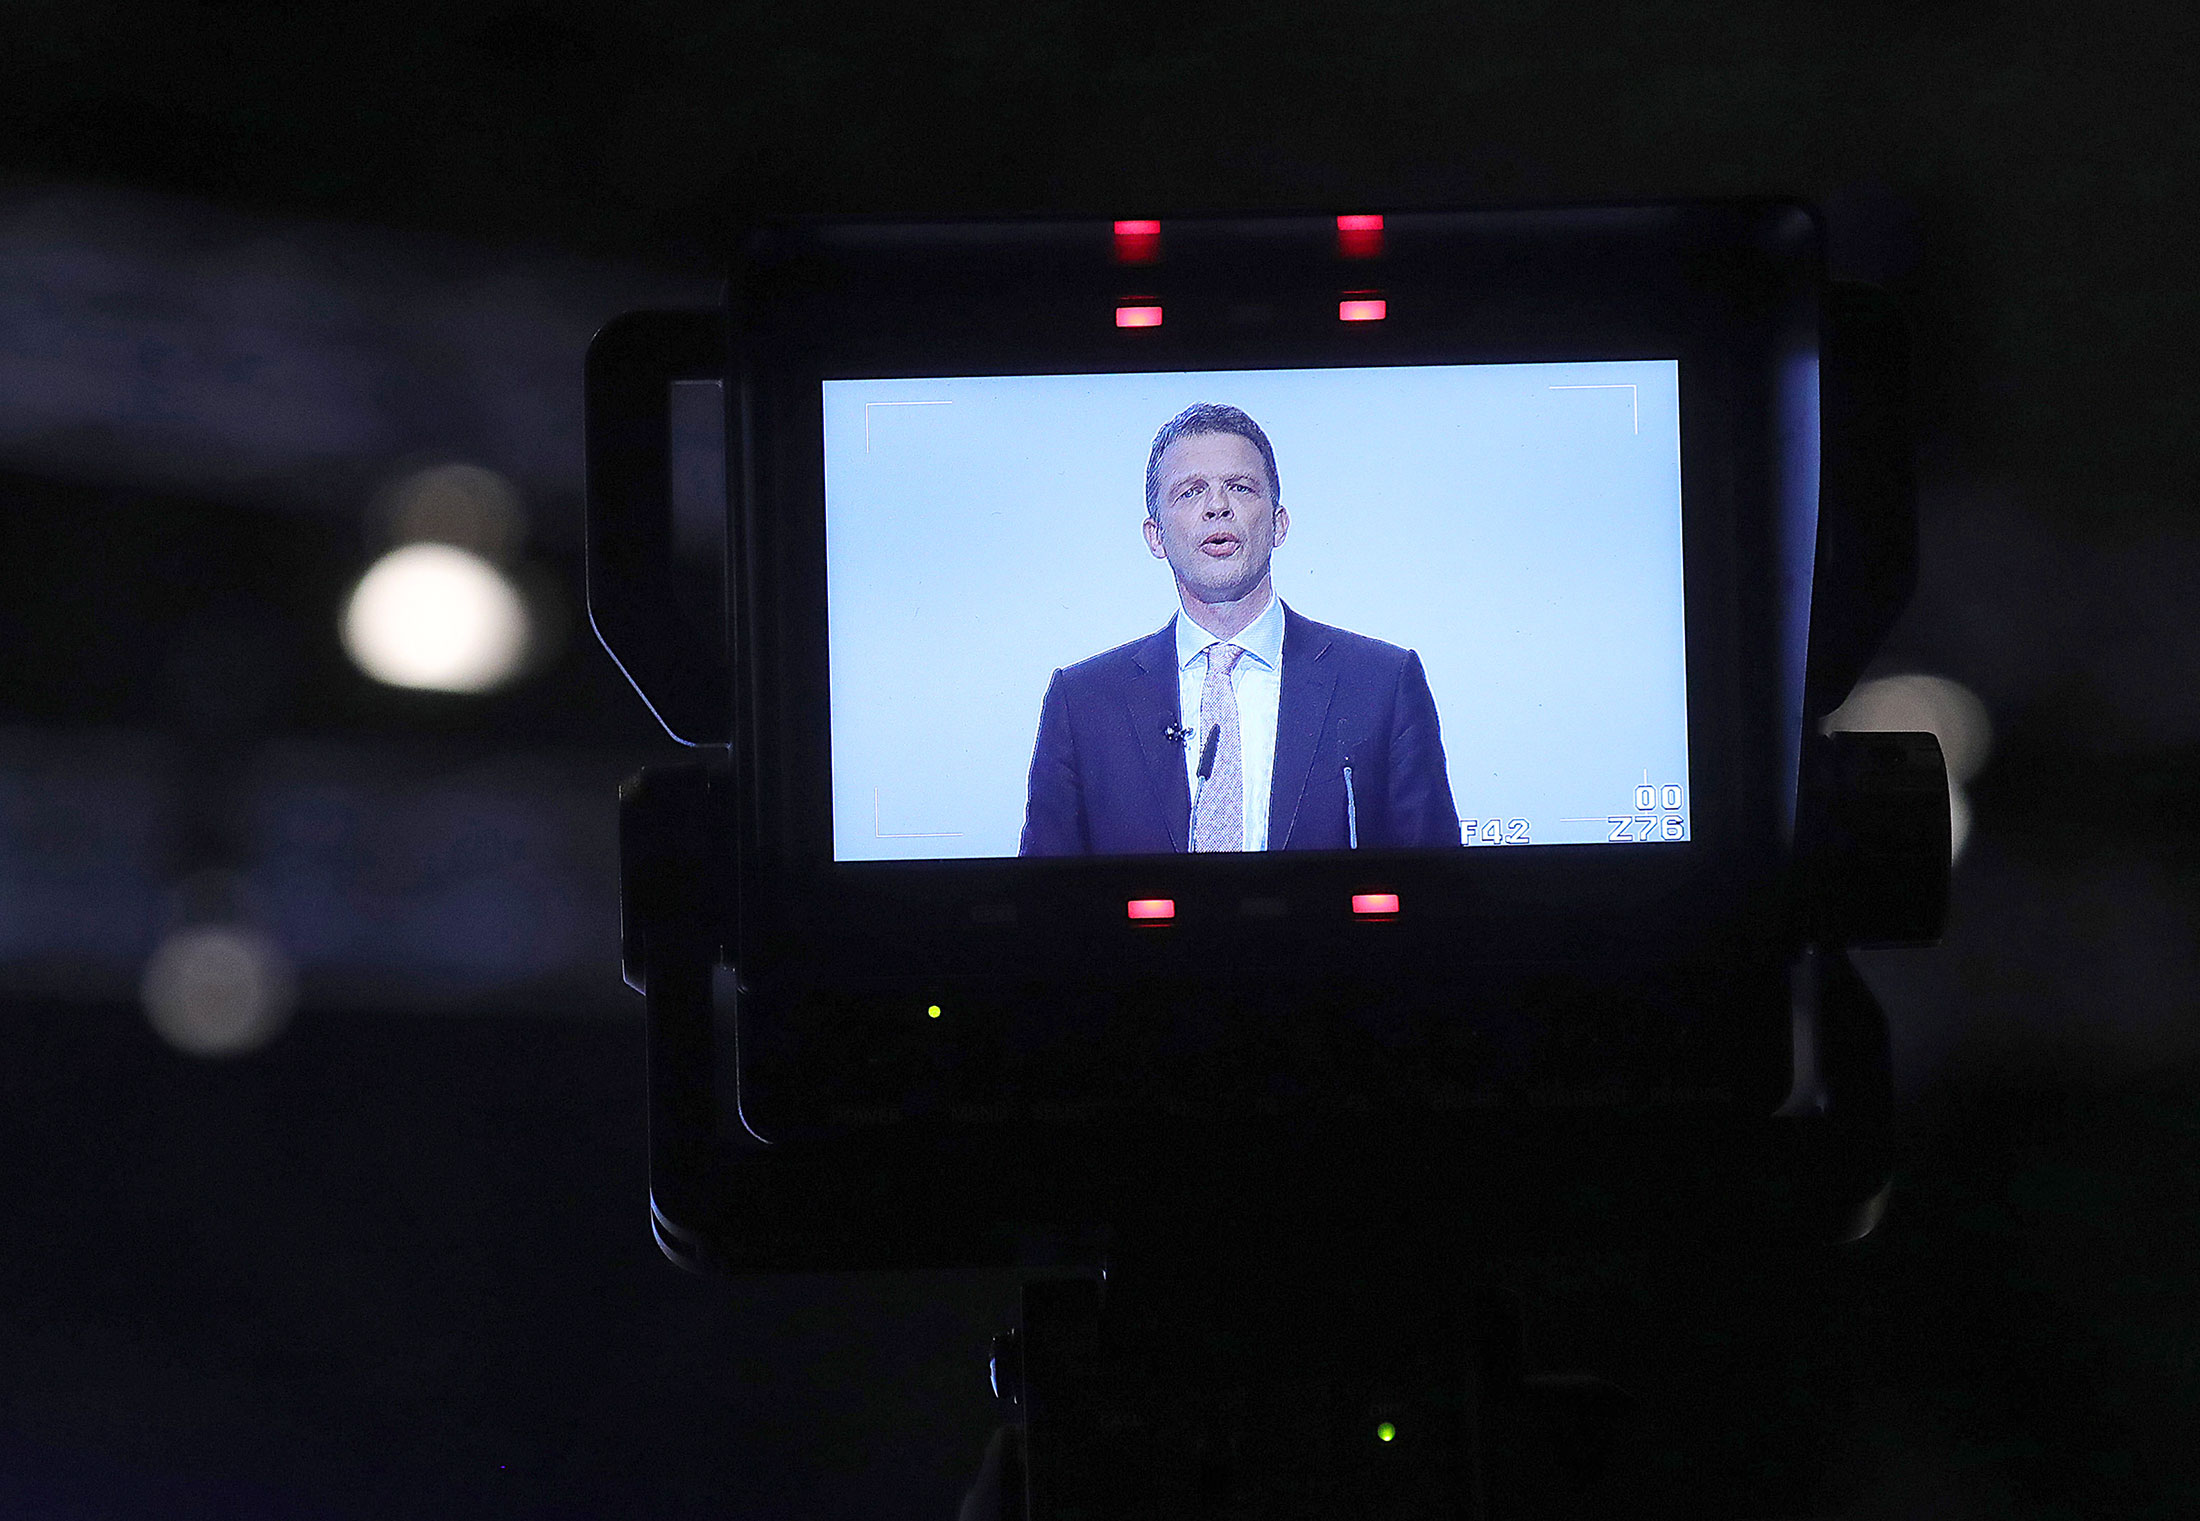 Christian Sewing, chief executive officer of Deutsche Bank AG, is displayed on a television camera monitor as he speaks at the German lender's annual general meeting in Frankfurt.